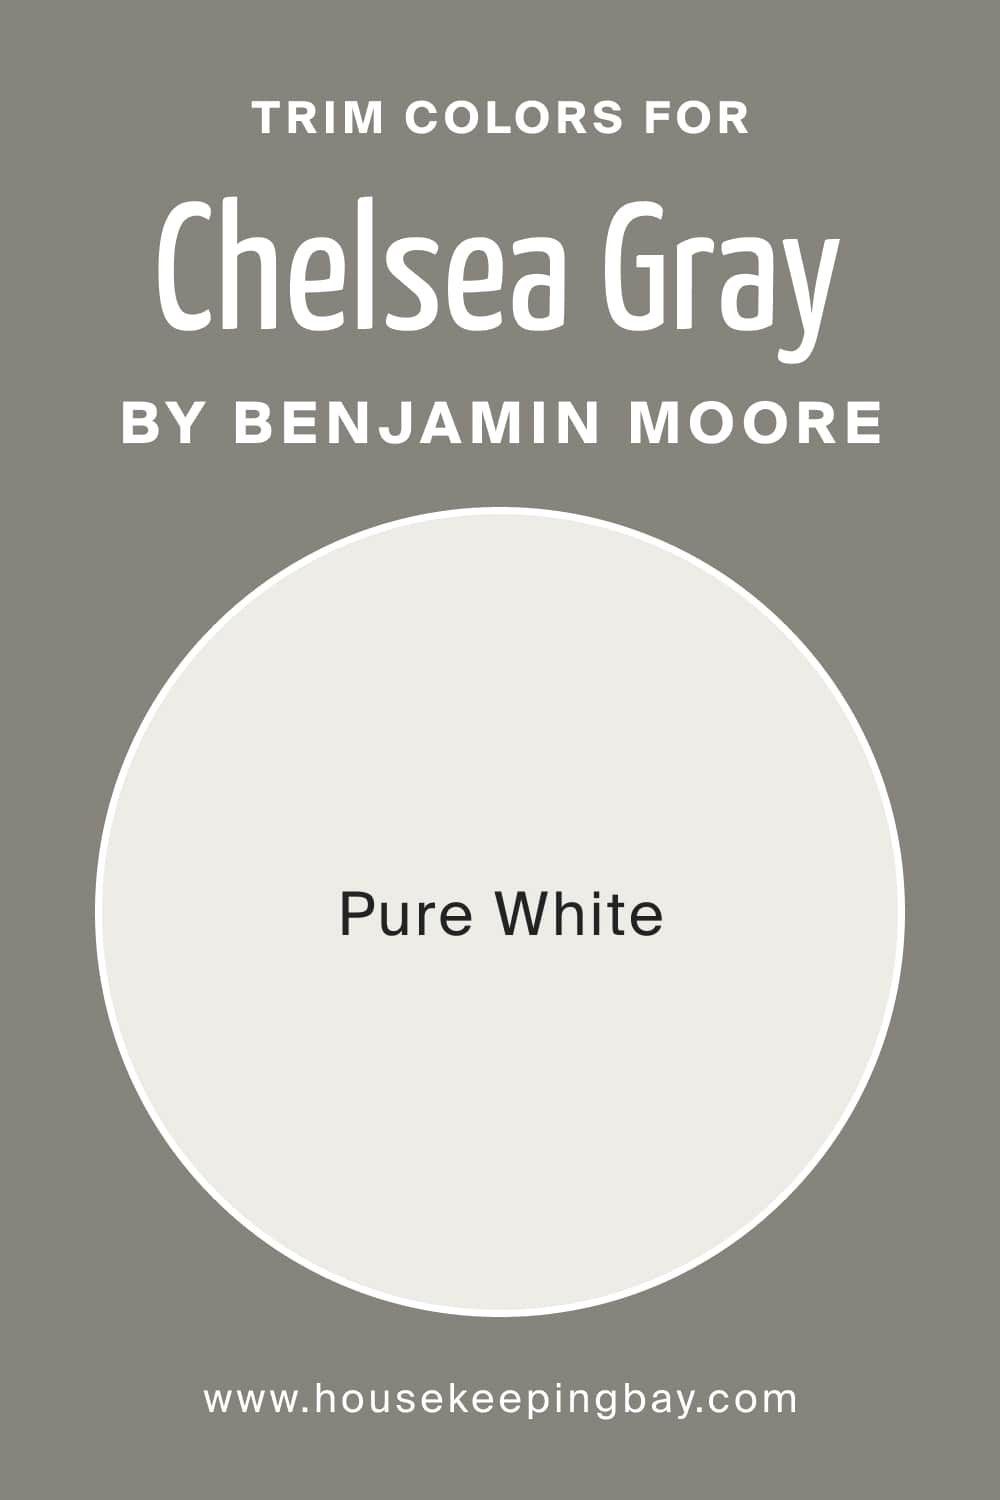 Trim Colors for Chelsea Gray HC 168 by Benjamin Moore